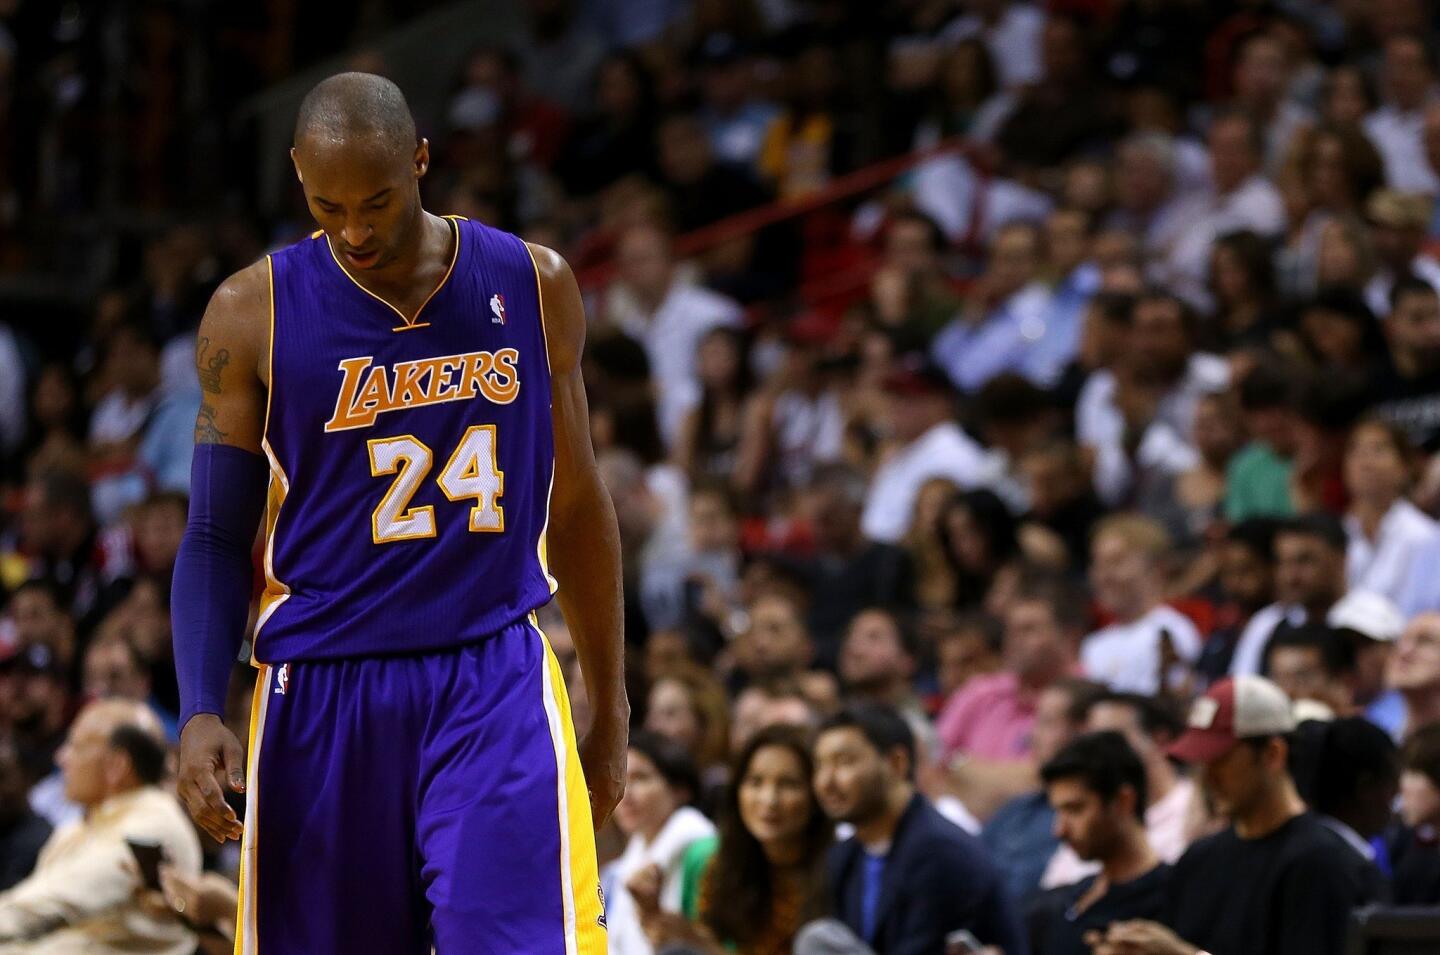 All-Star guard Kobe Bryant and the Lakers finished their Grammy trip with a 107-97 loss to the Heat on Sunday in Miami.